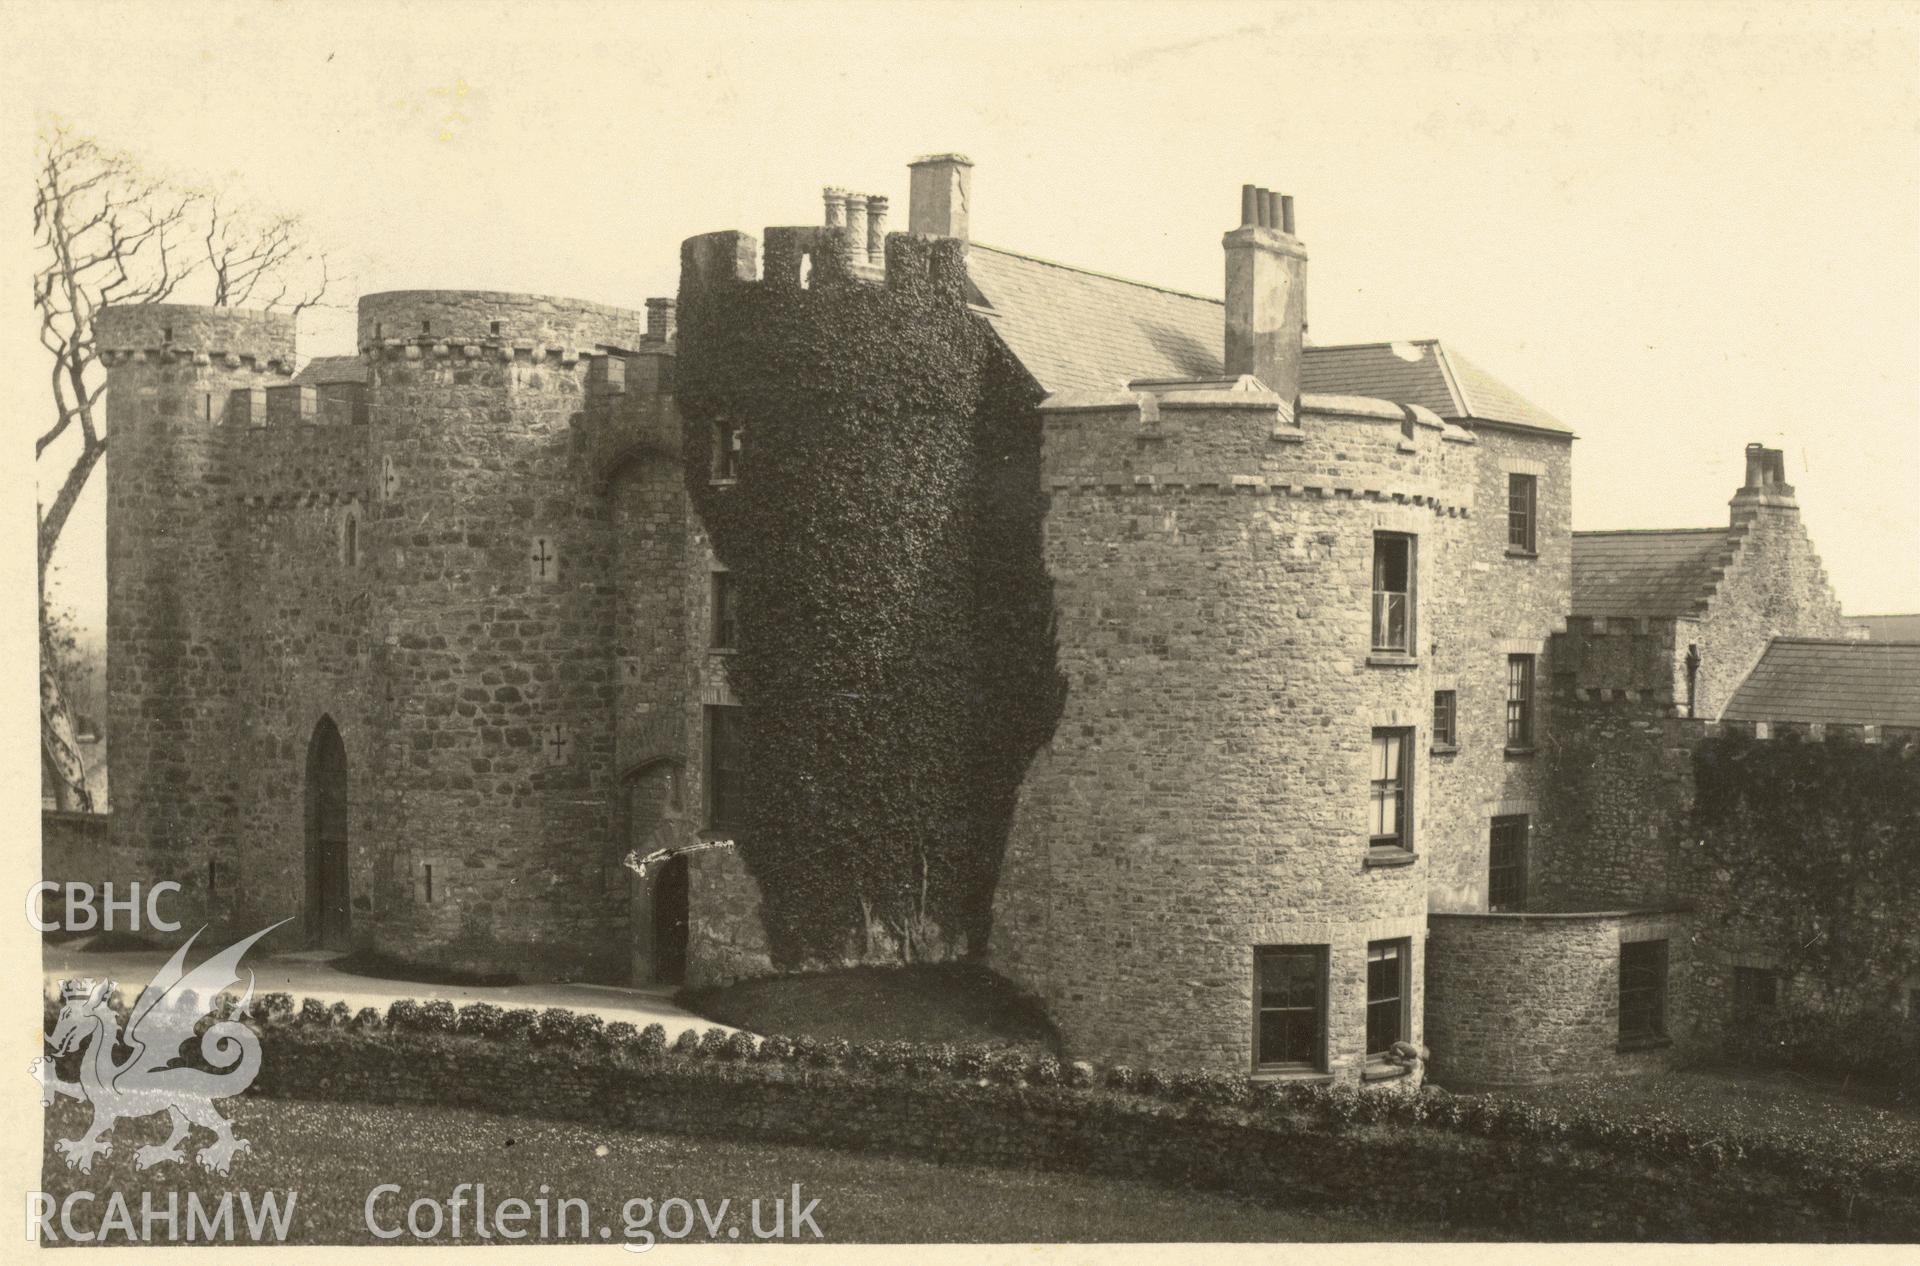 Digitised postcard image of Upton castle, Cosheston, S.J Allen, Cressswell Buildings, Pembroke Dock. Produced by Parks and Gardens Data Services, from an original item in the Peter Davis Collection at Parks and Gardens UK. We hold only web-resolution images of this collection, suitable for viewing on screen and for research purposes only. We do not hold the original images, or publication quality scans.